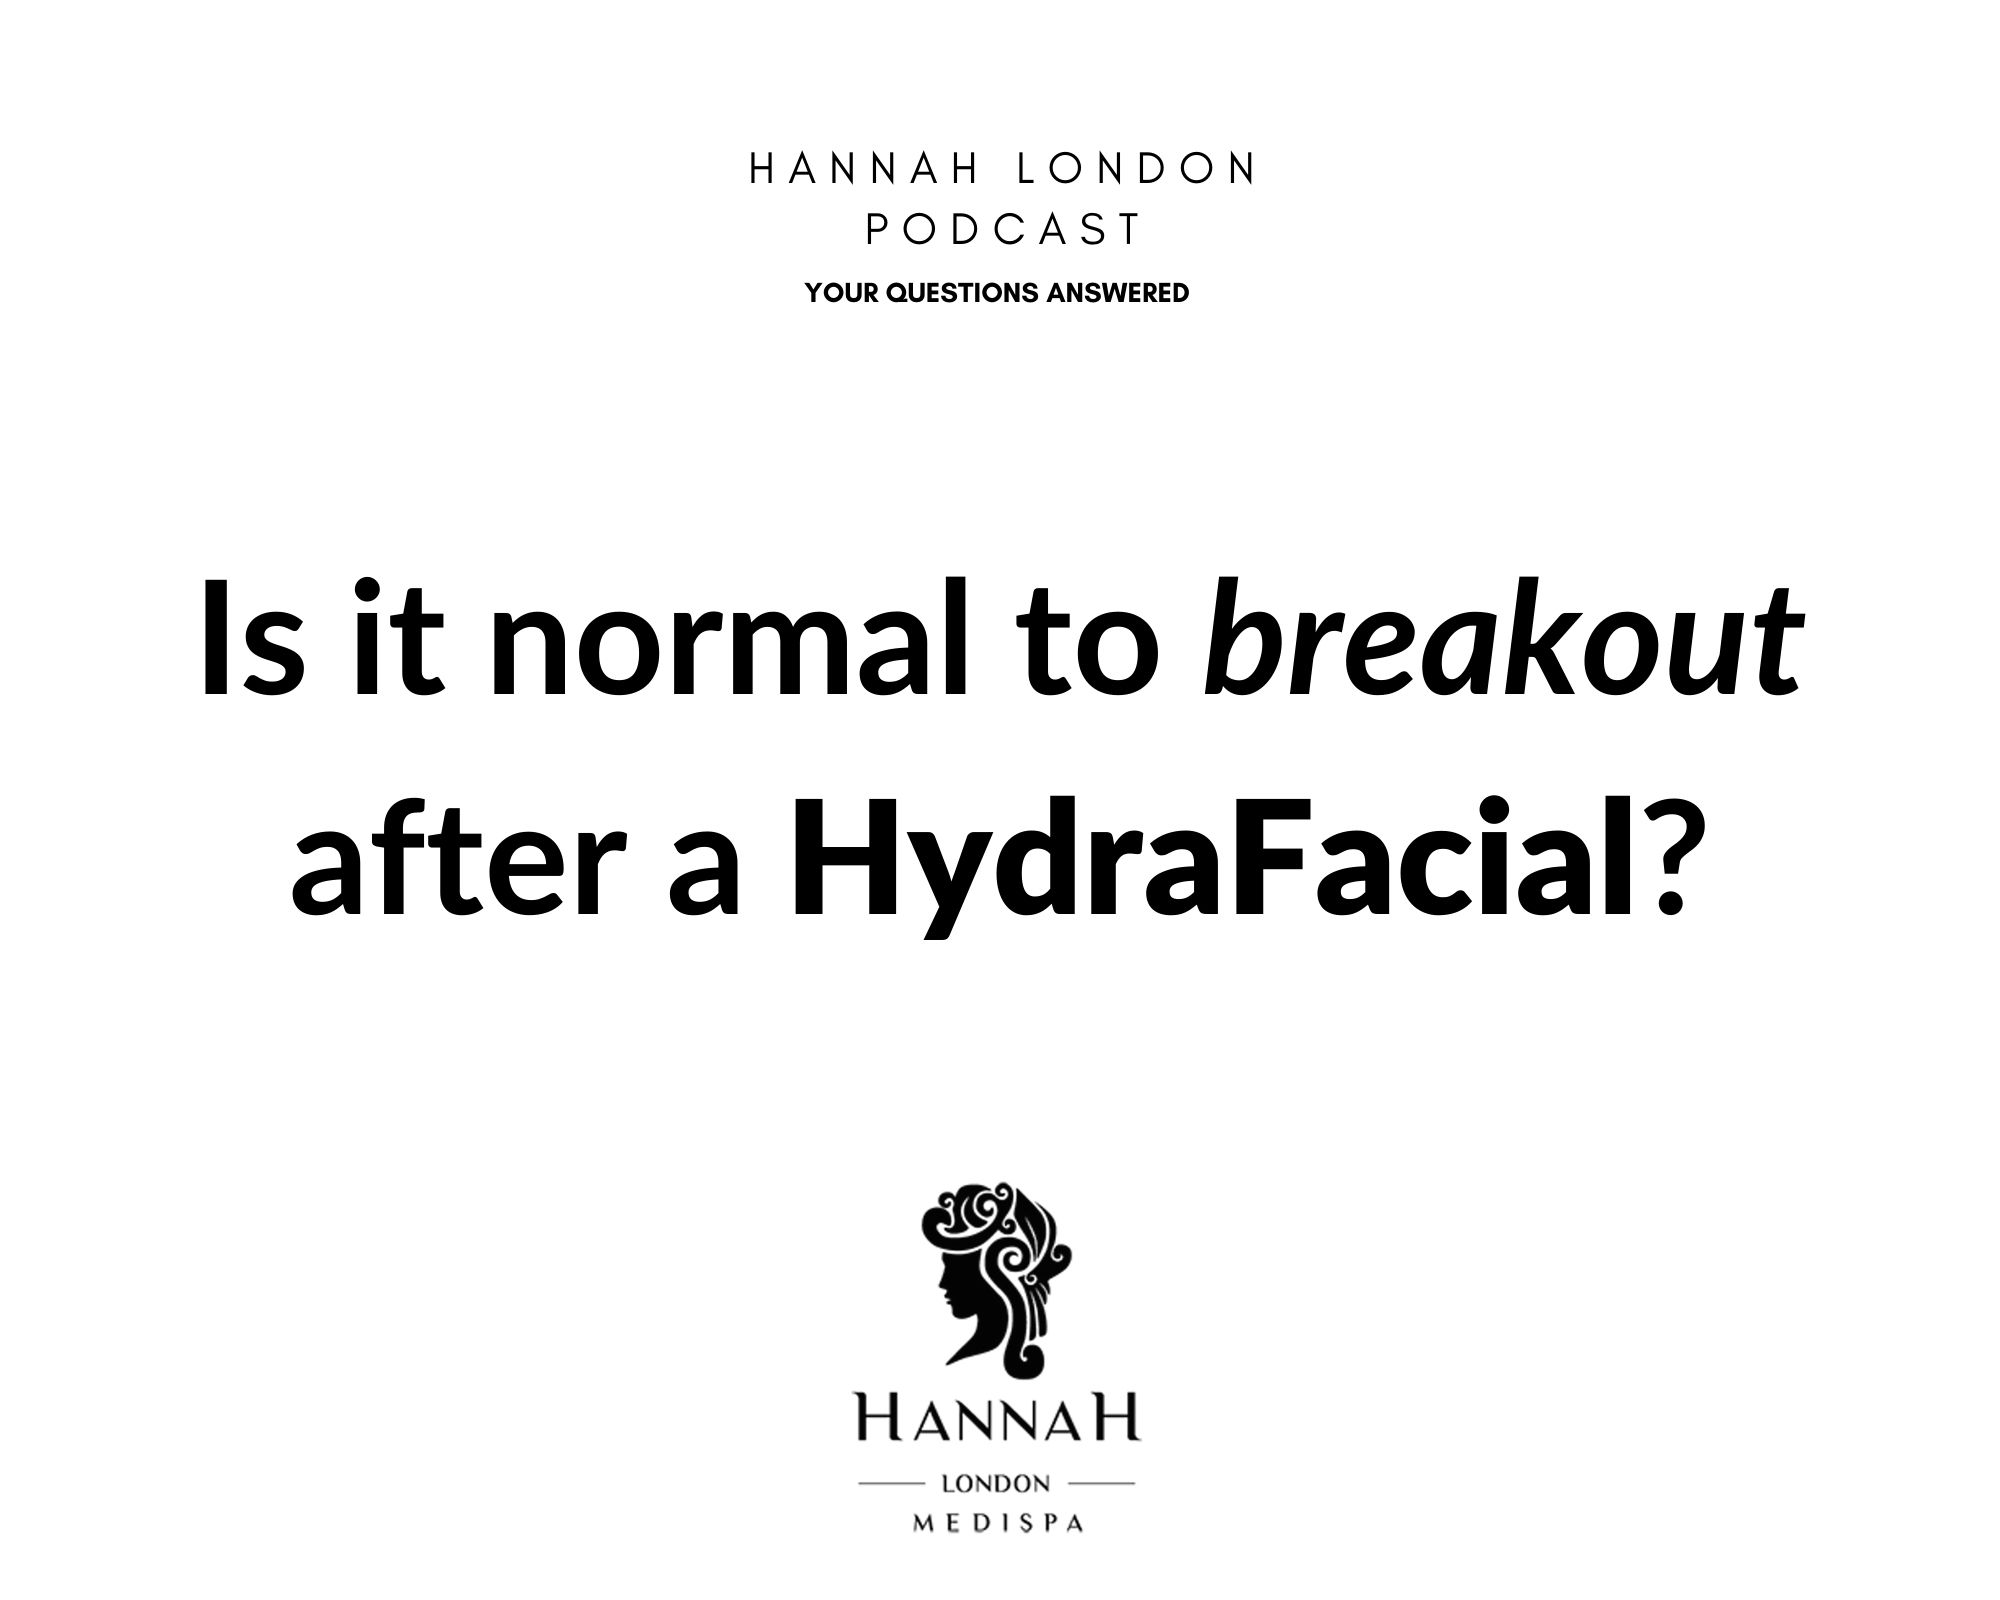 Is it normal to breakout after a HydraFacial?